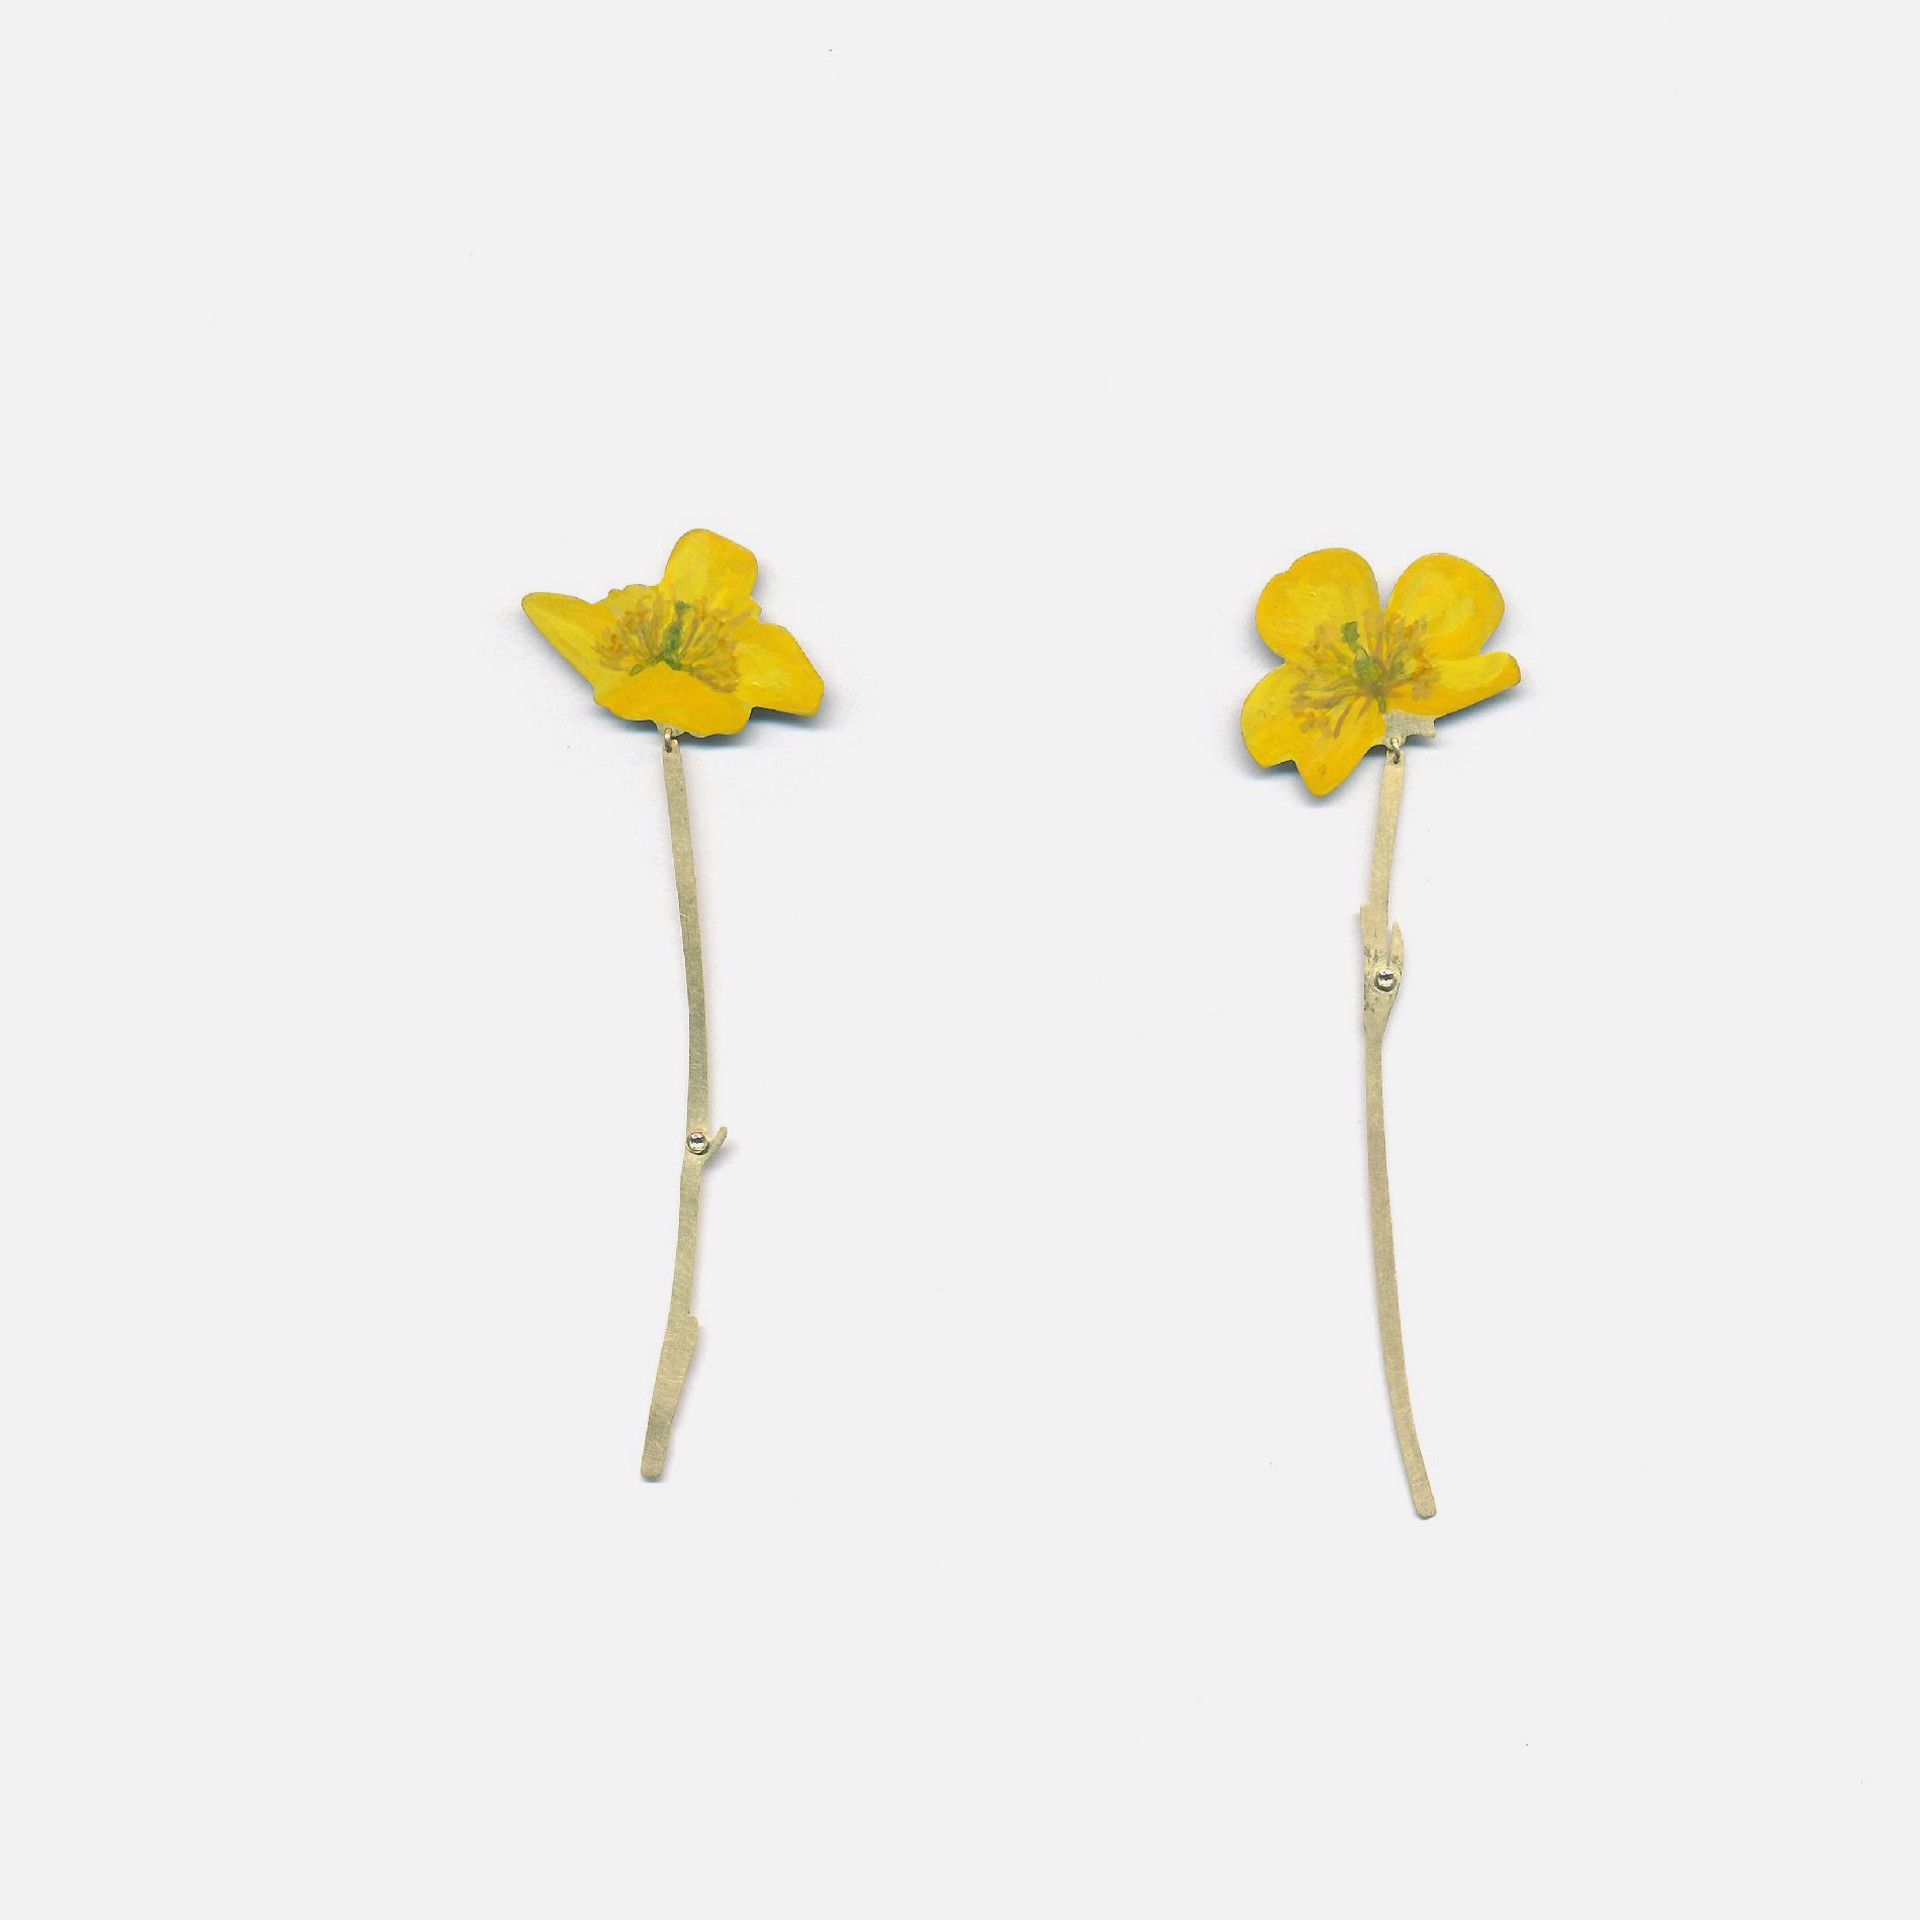 Natura Morta: Buttercup Drop Earrings by Christopher Thompson Royds